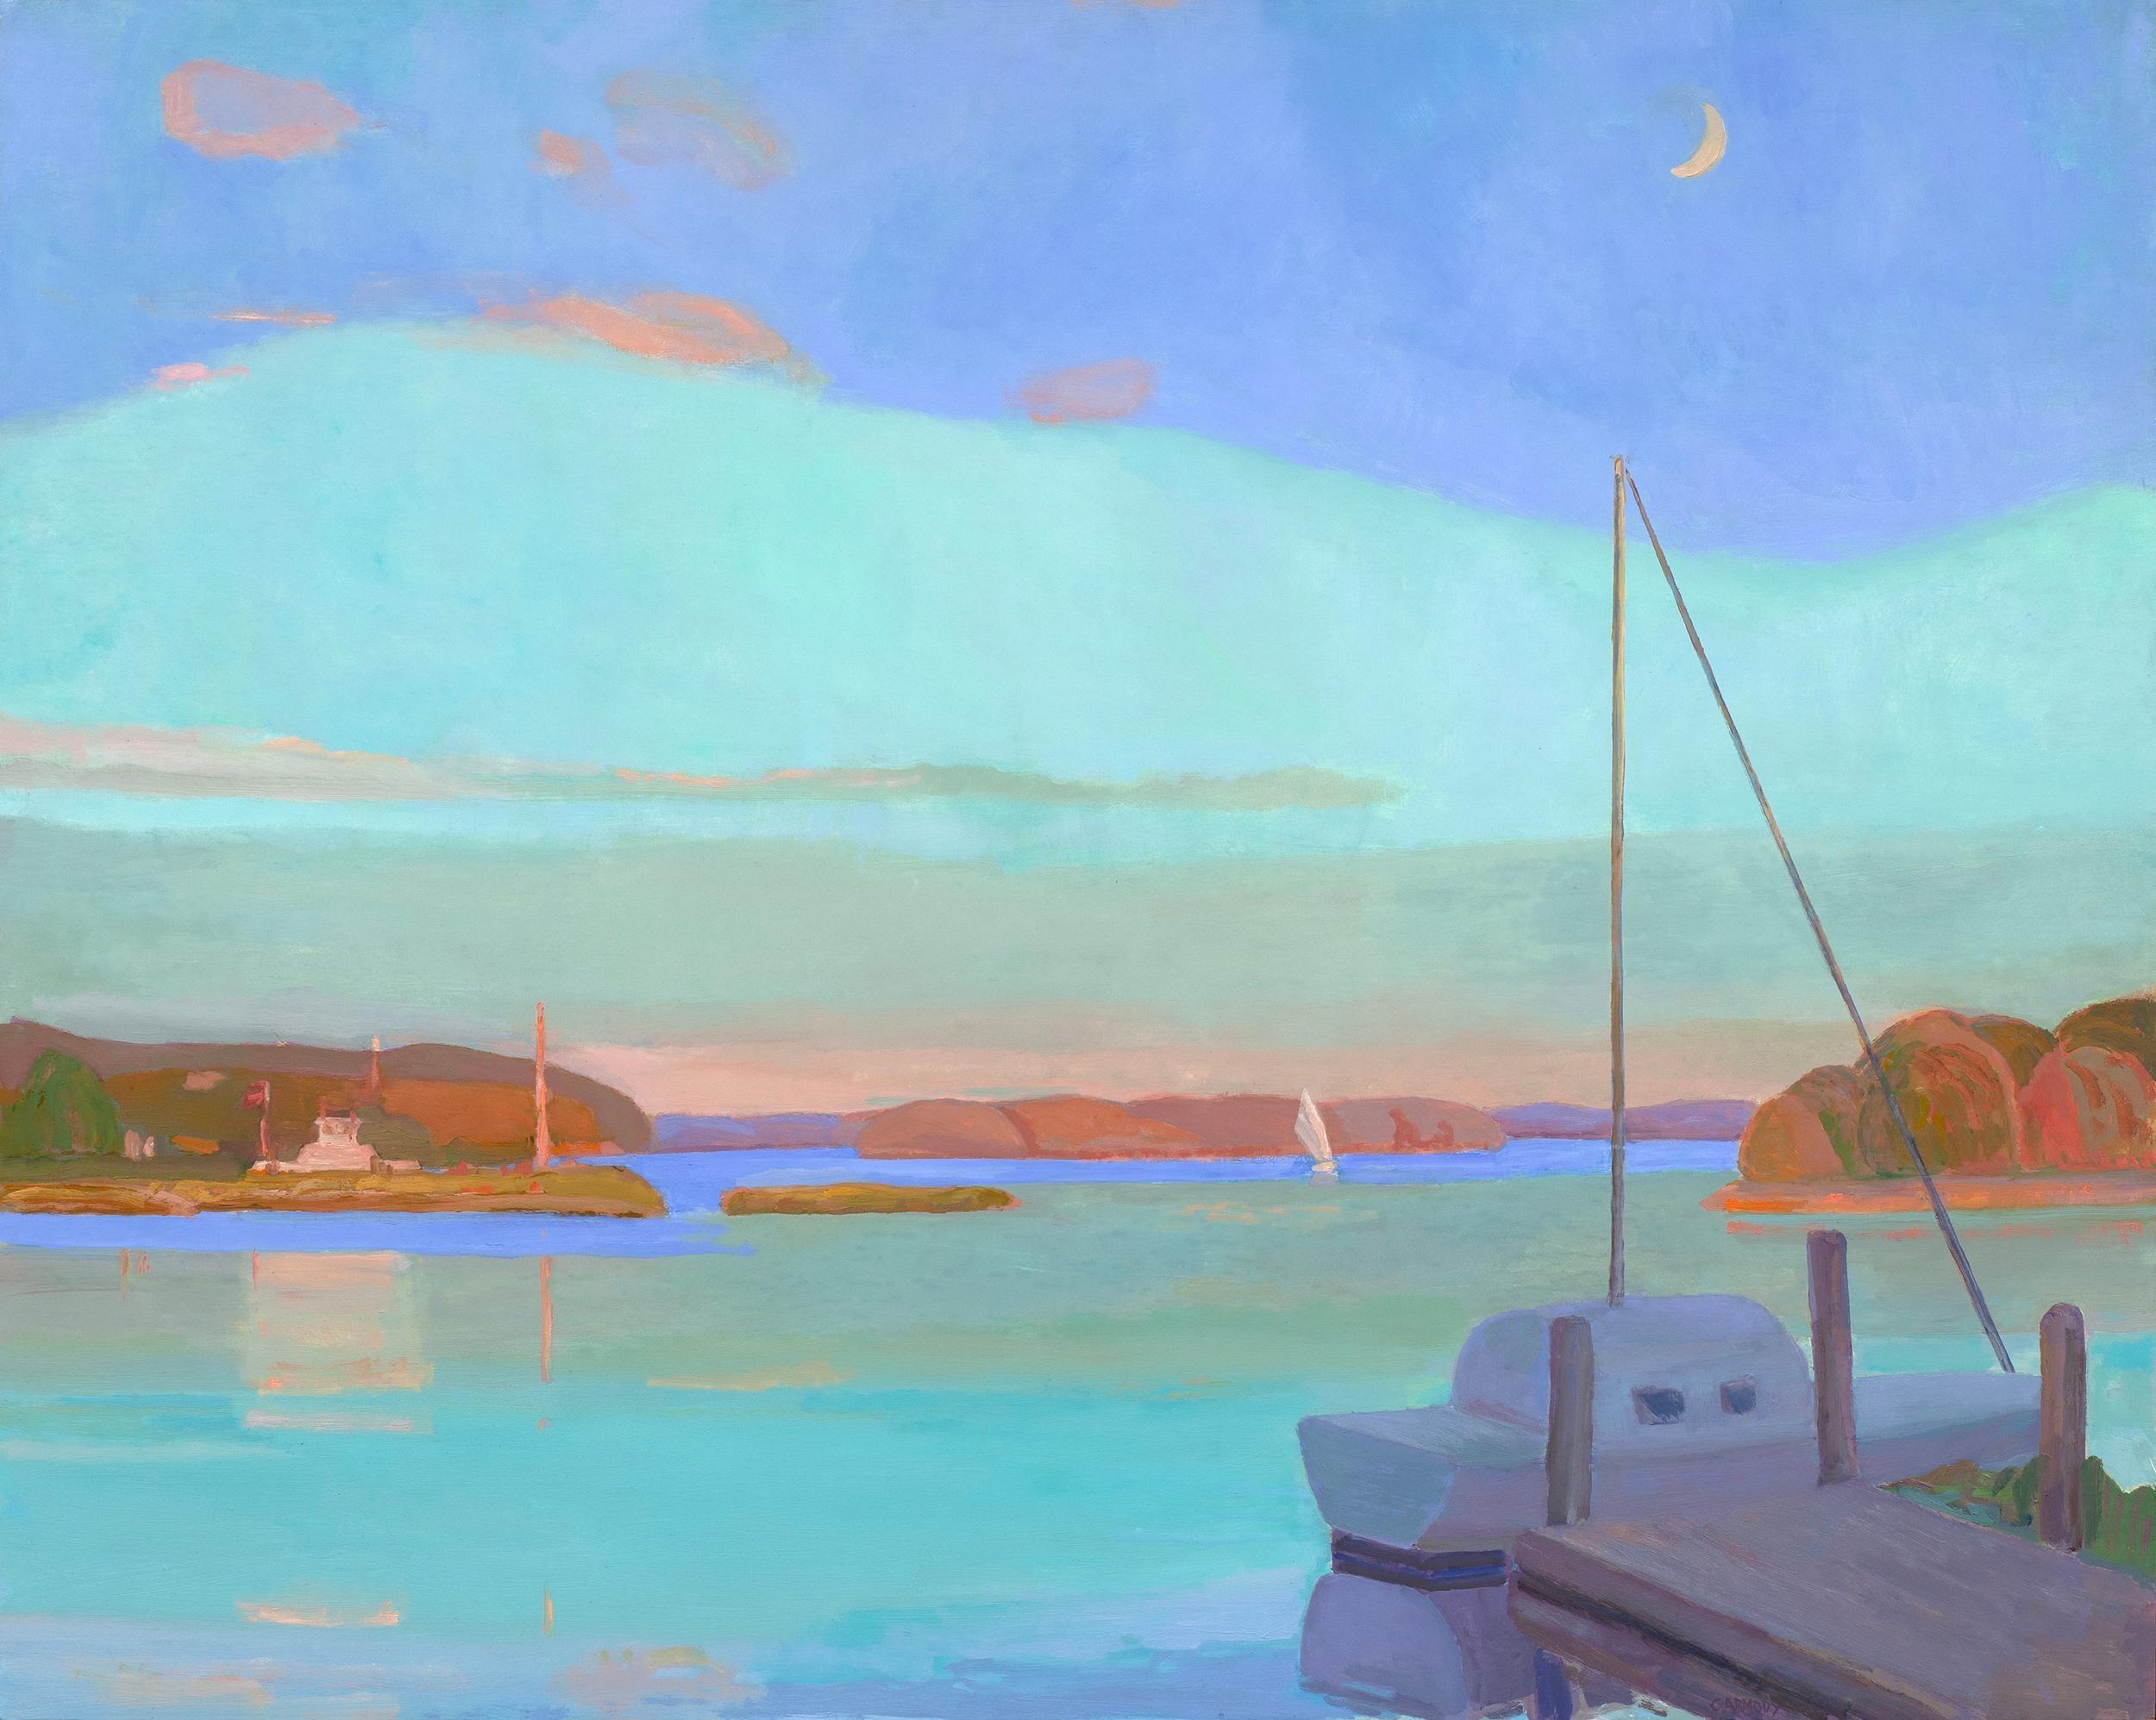 Kelly Carmody Landscape Painting - "Shelter Island Evening" blue and green seascape of a harbor - oil painting